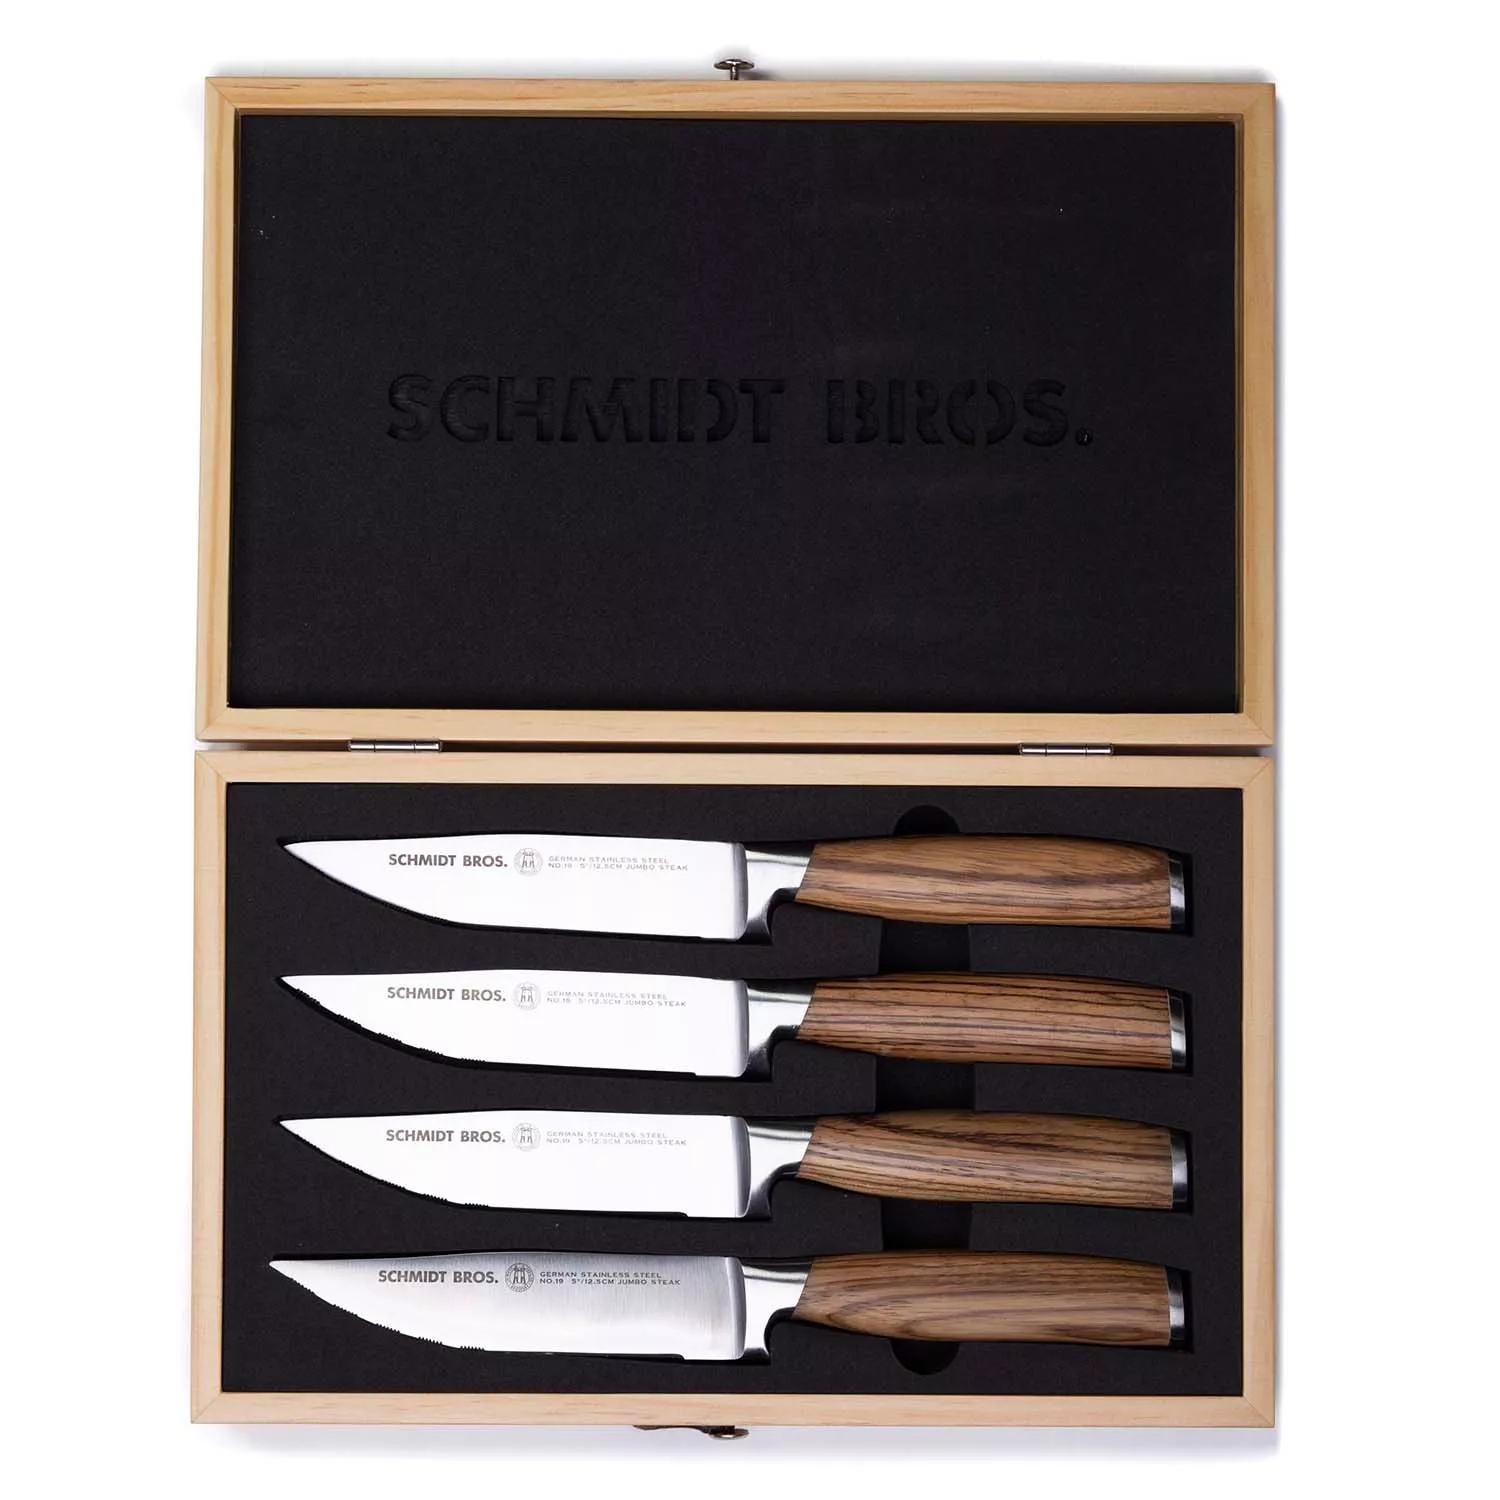 Up To 60% Off on Cheese/Steak Knife Set (4-Pc.)